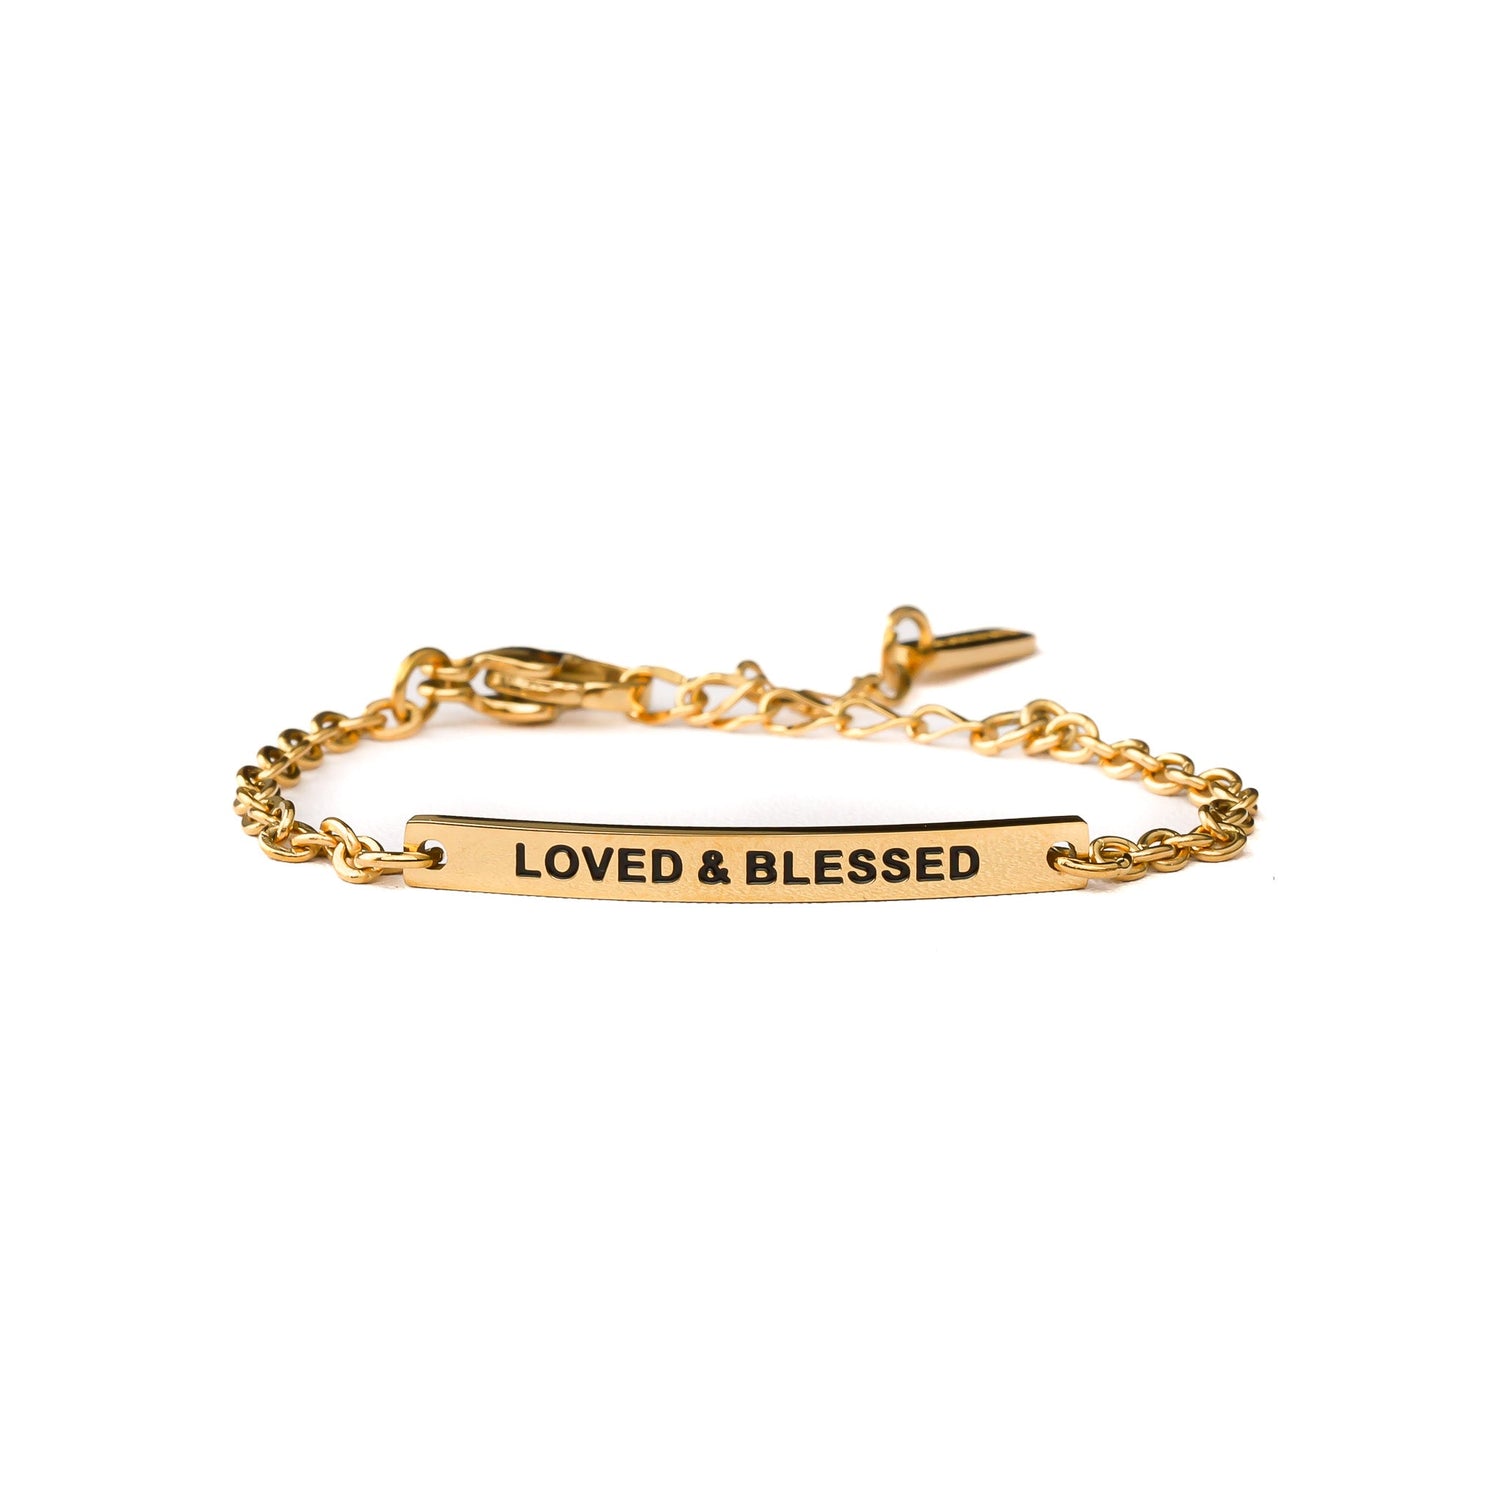 LOVED AND BLESSED - KIDS CHAIN BRACELET - Inspiration Co.